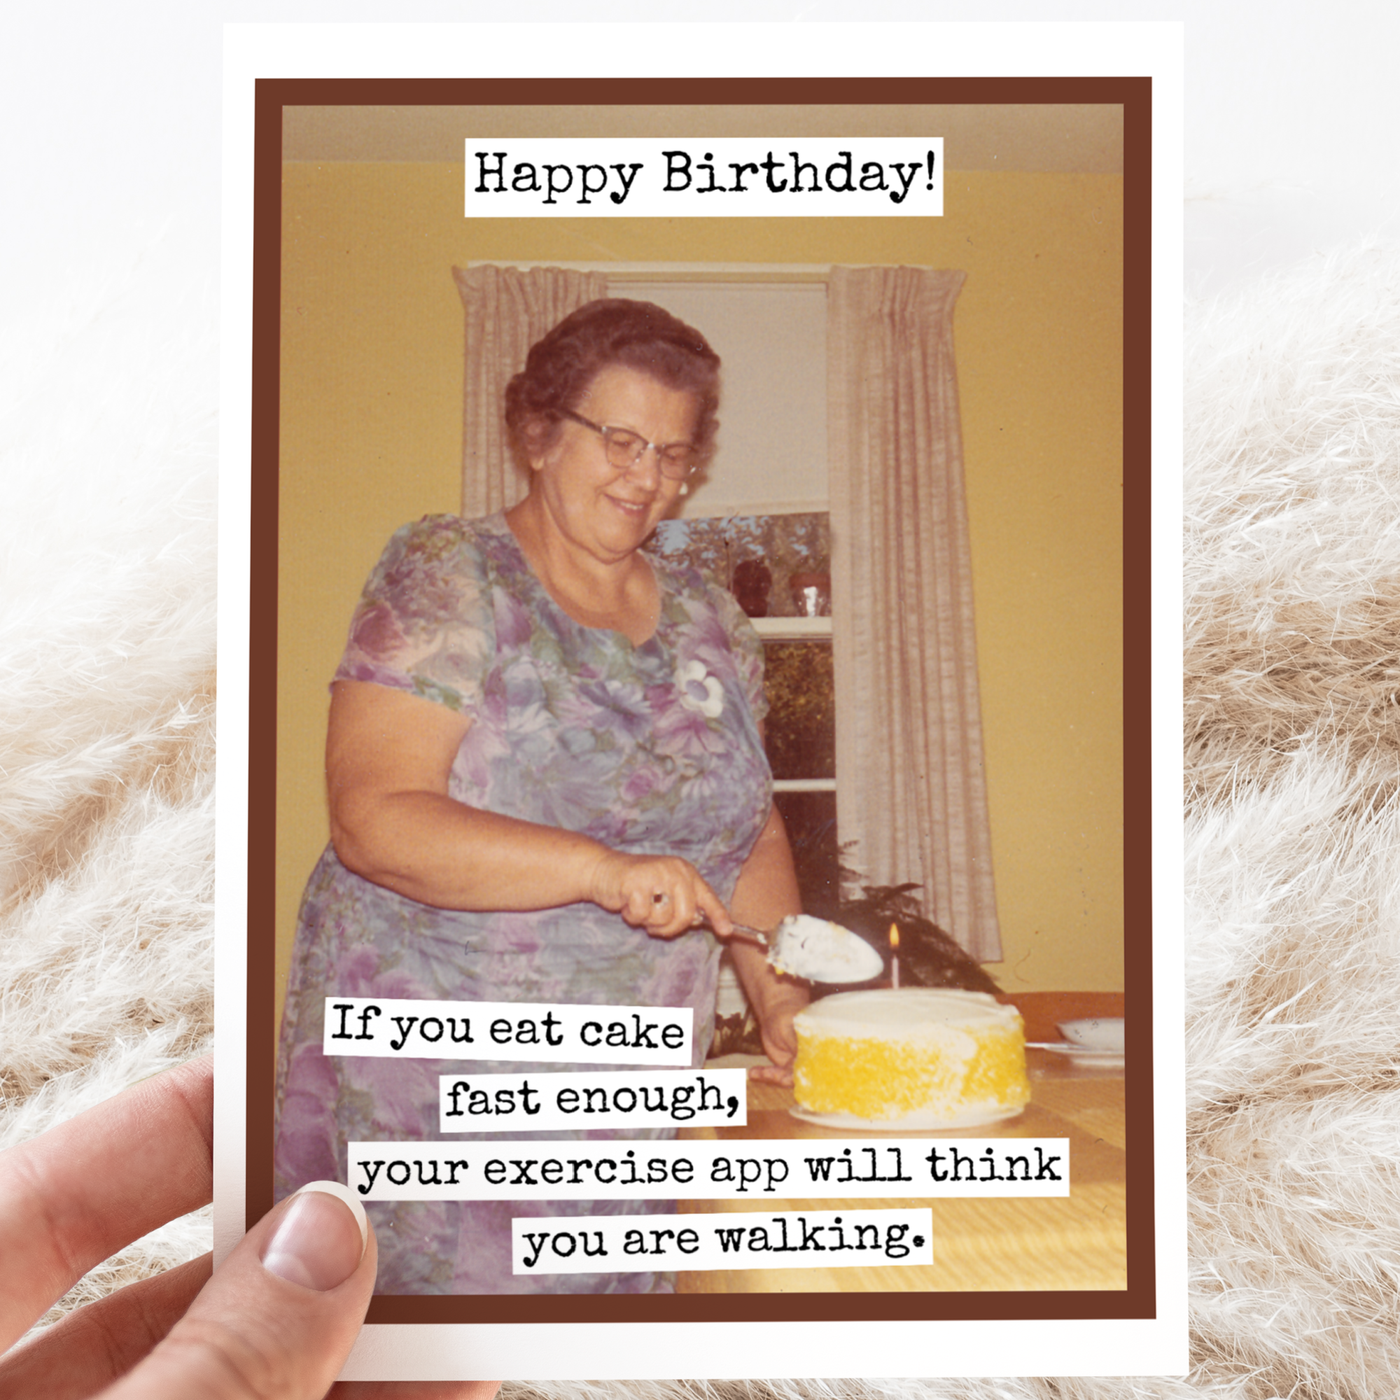 Raven's Rest Studio Funny Birthday Card. If You Eat Cake Fast Enough... Vintage - Simple Good